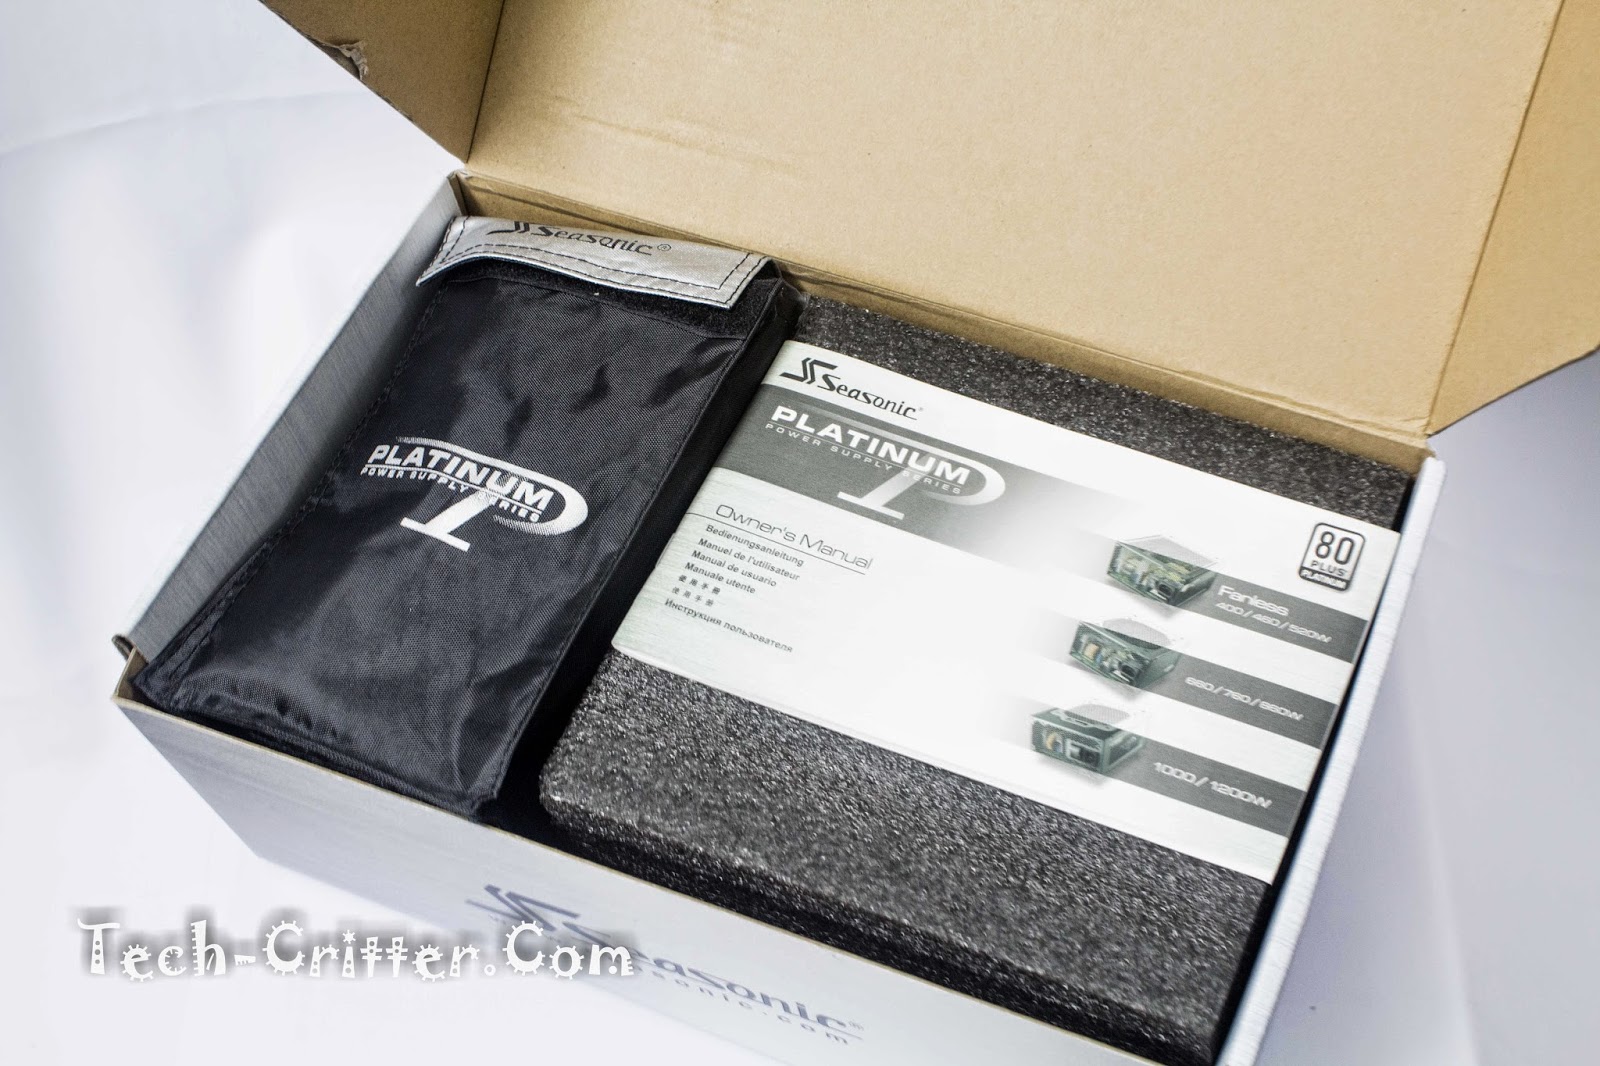 Unboxing & Overview: Seasonic Platinum Series 860W Power Supply Unit 16